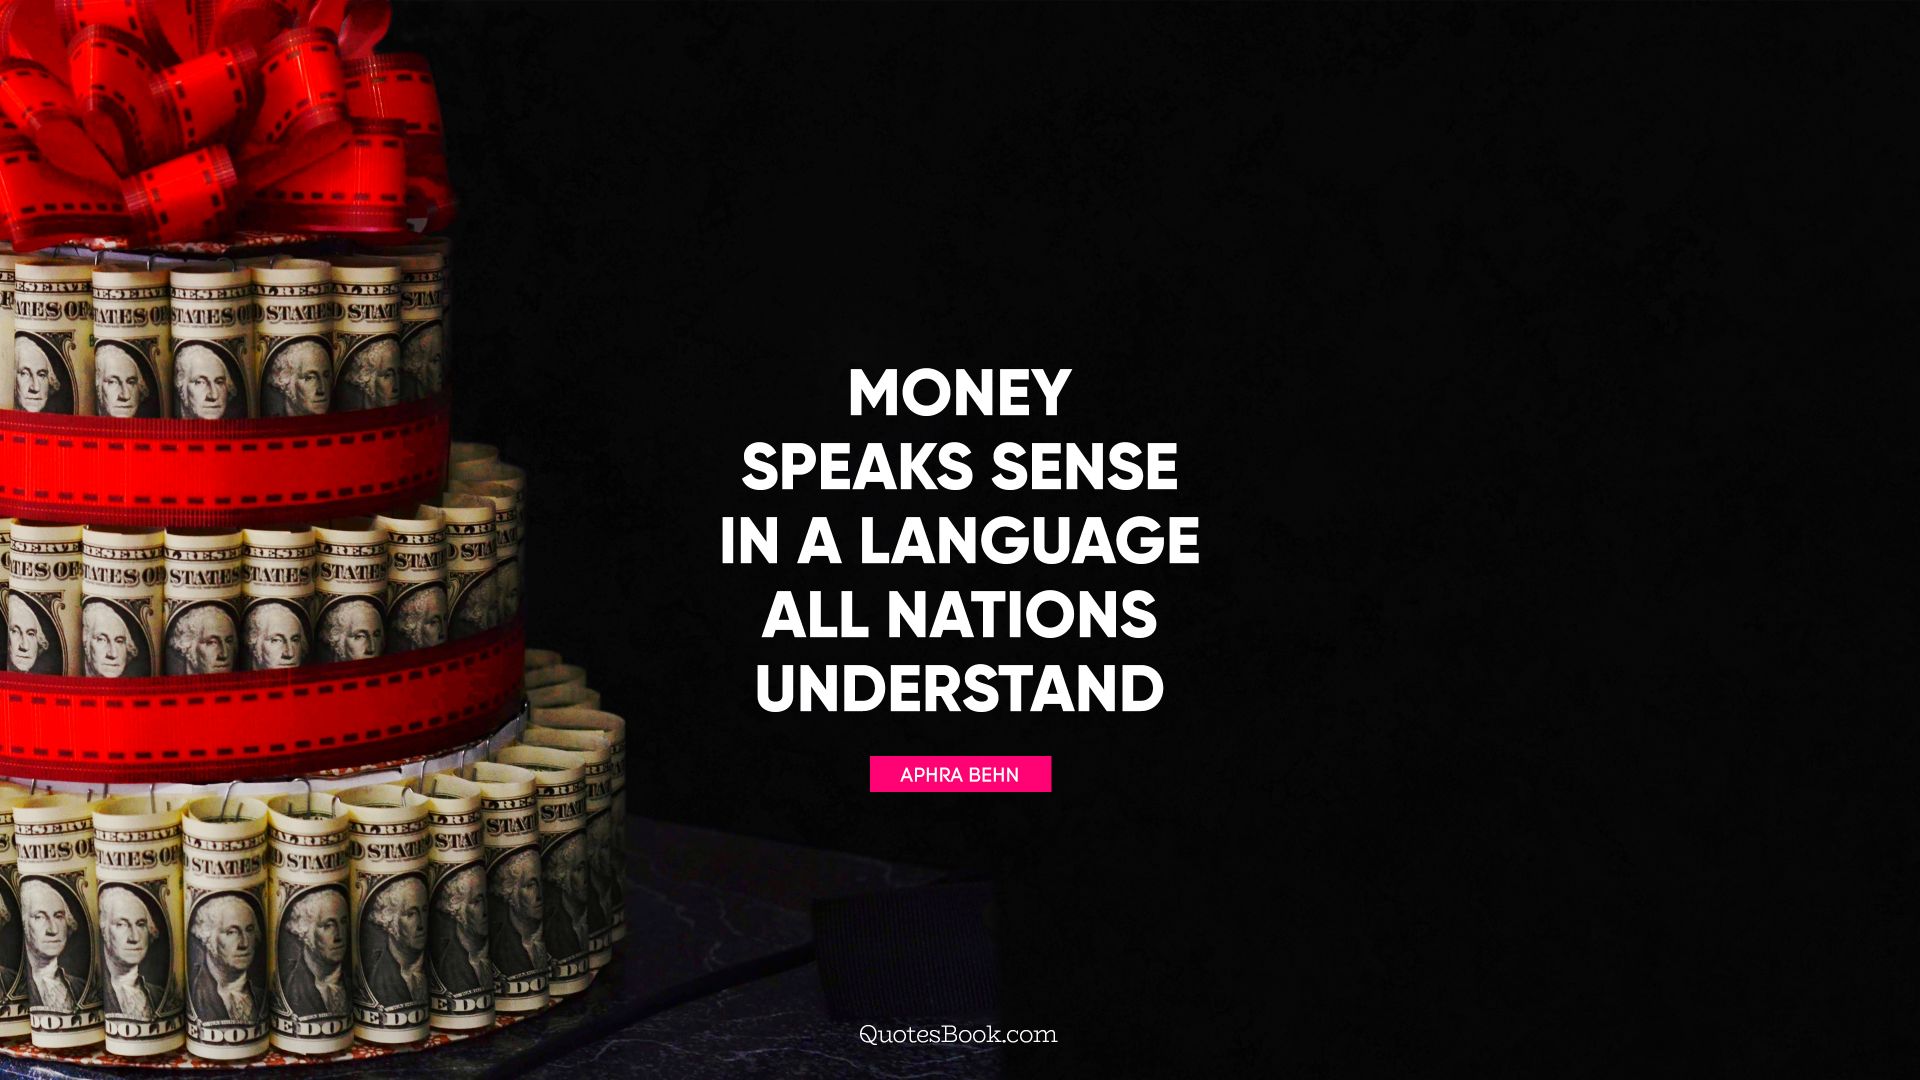 Money speaks sense in a language all nations understand. - Quote by Aphra Behn